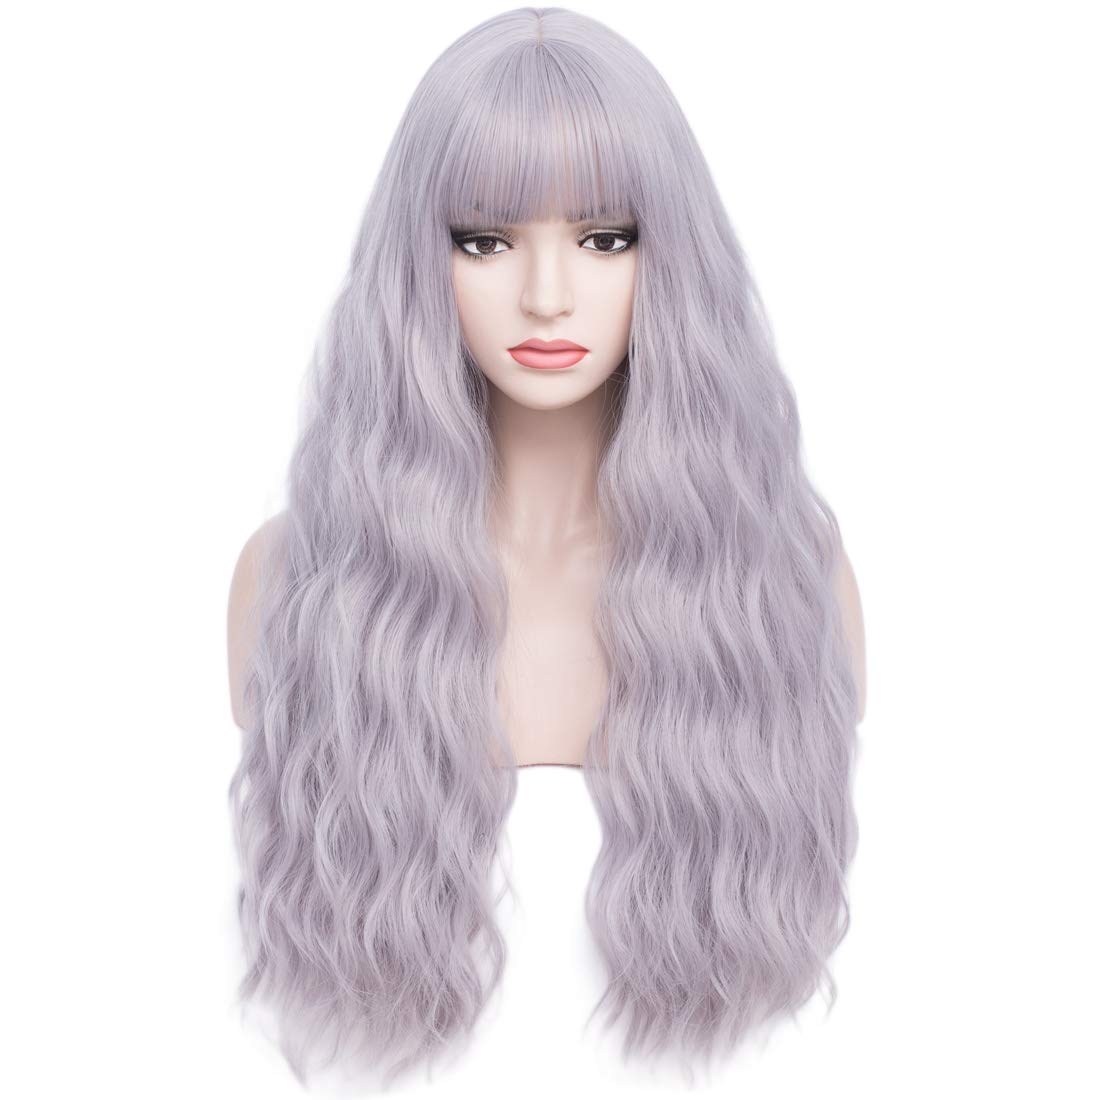 grey wig with bangs,silver wig ,silver wig with bangs ,cosplay wigCosplay Wig Curly Wavy Blonde Hair Wig with Bangs